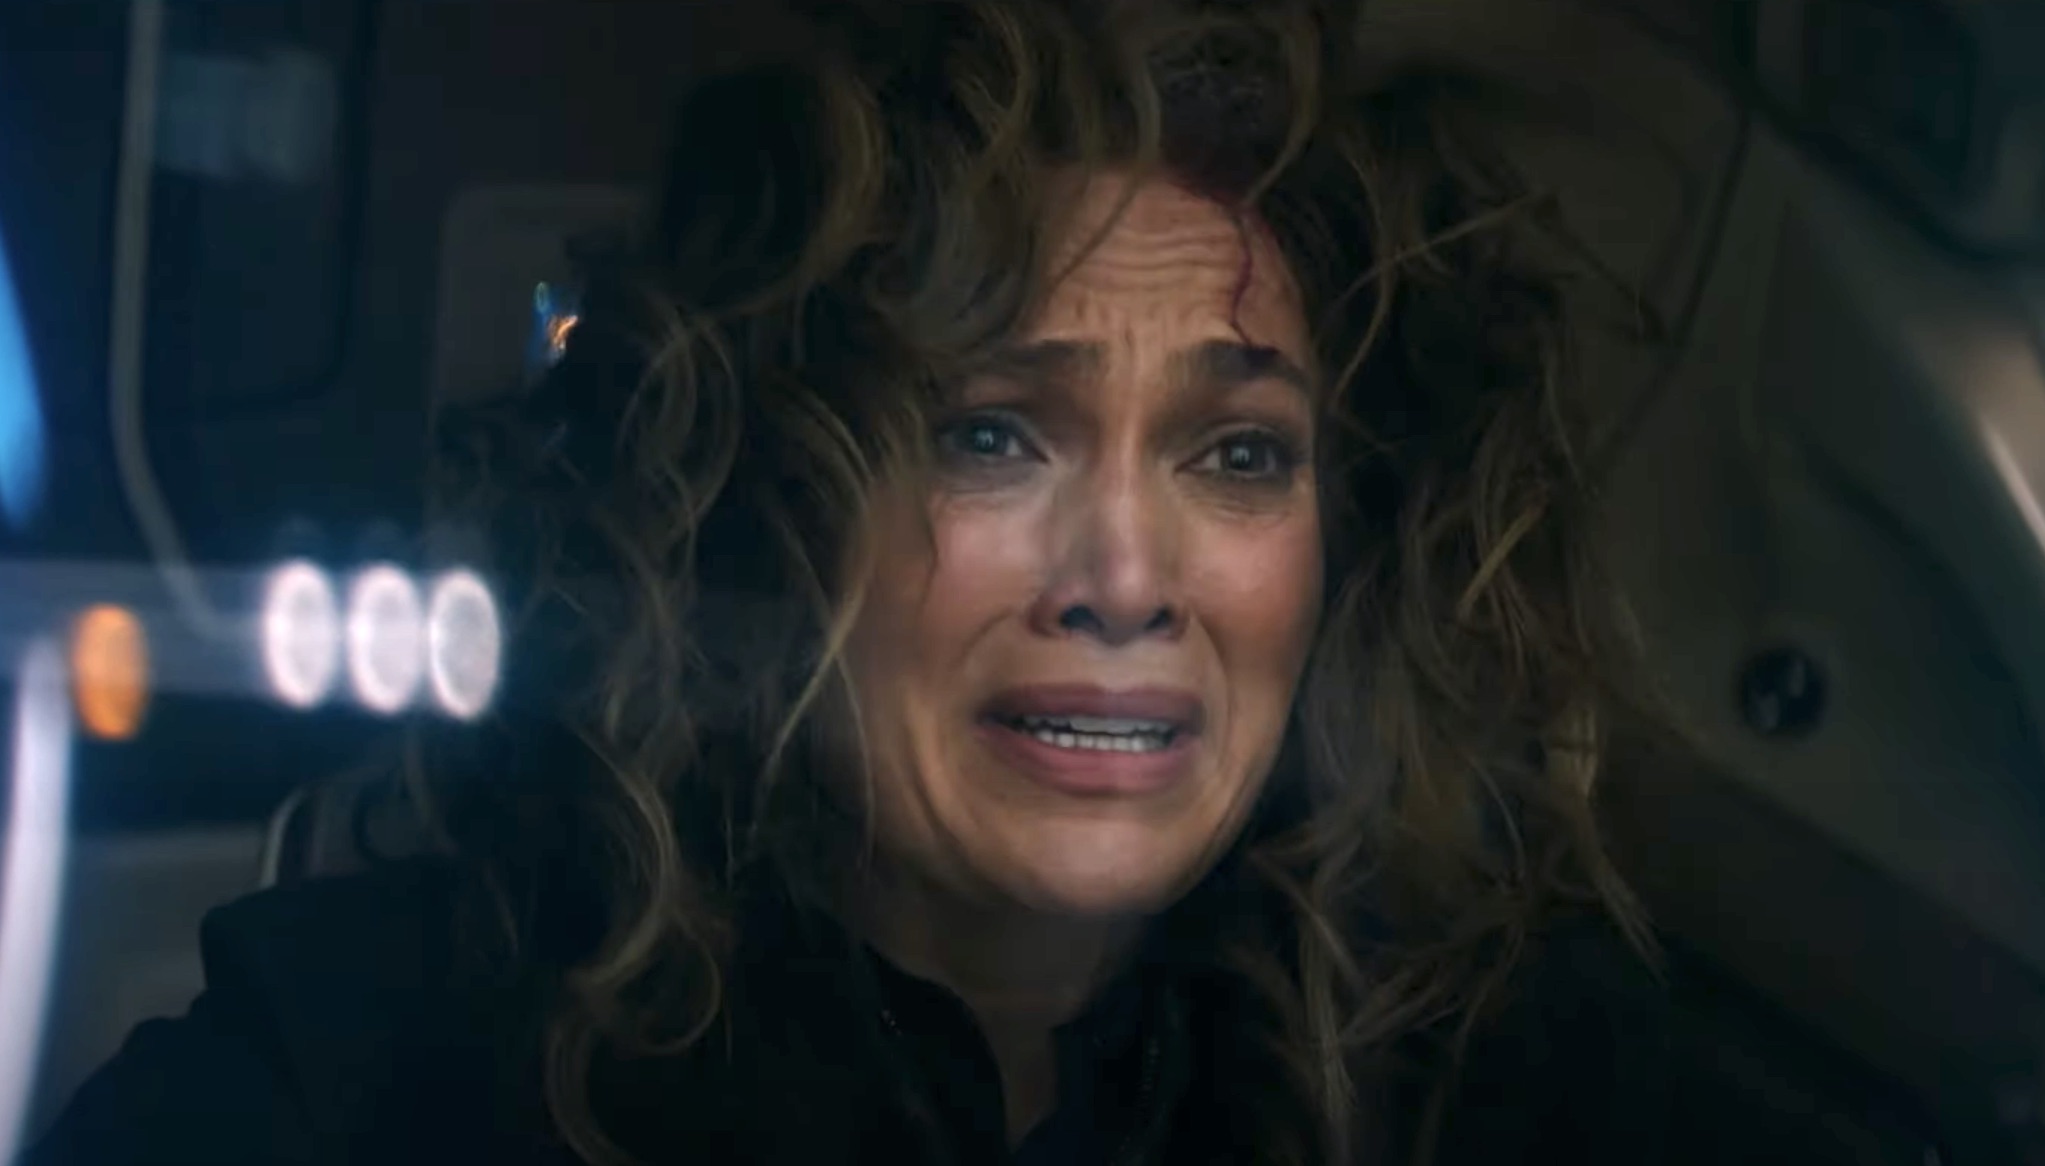 First Look Trailer: Jennifer Lopez Stars in Action-Packed ‘Atlas’